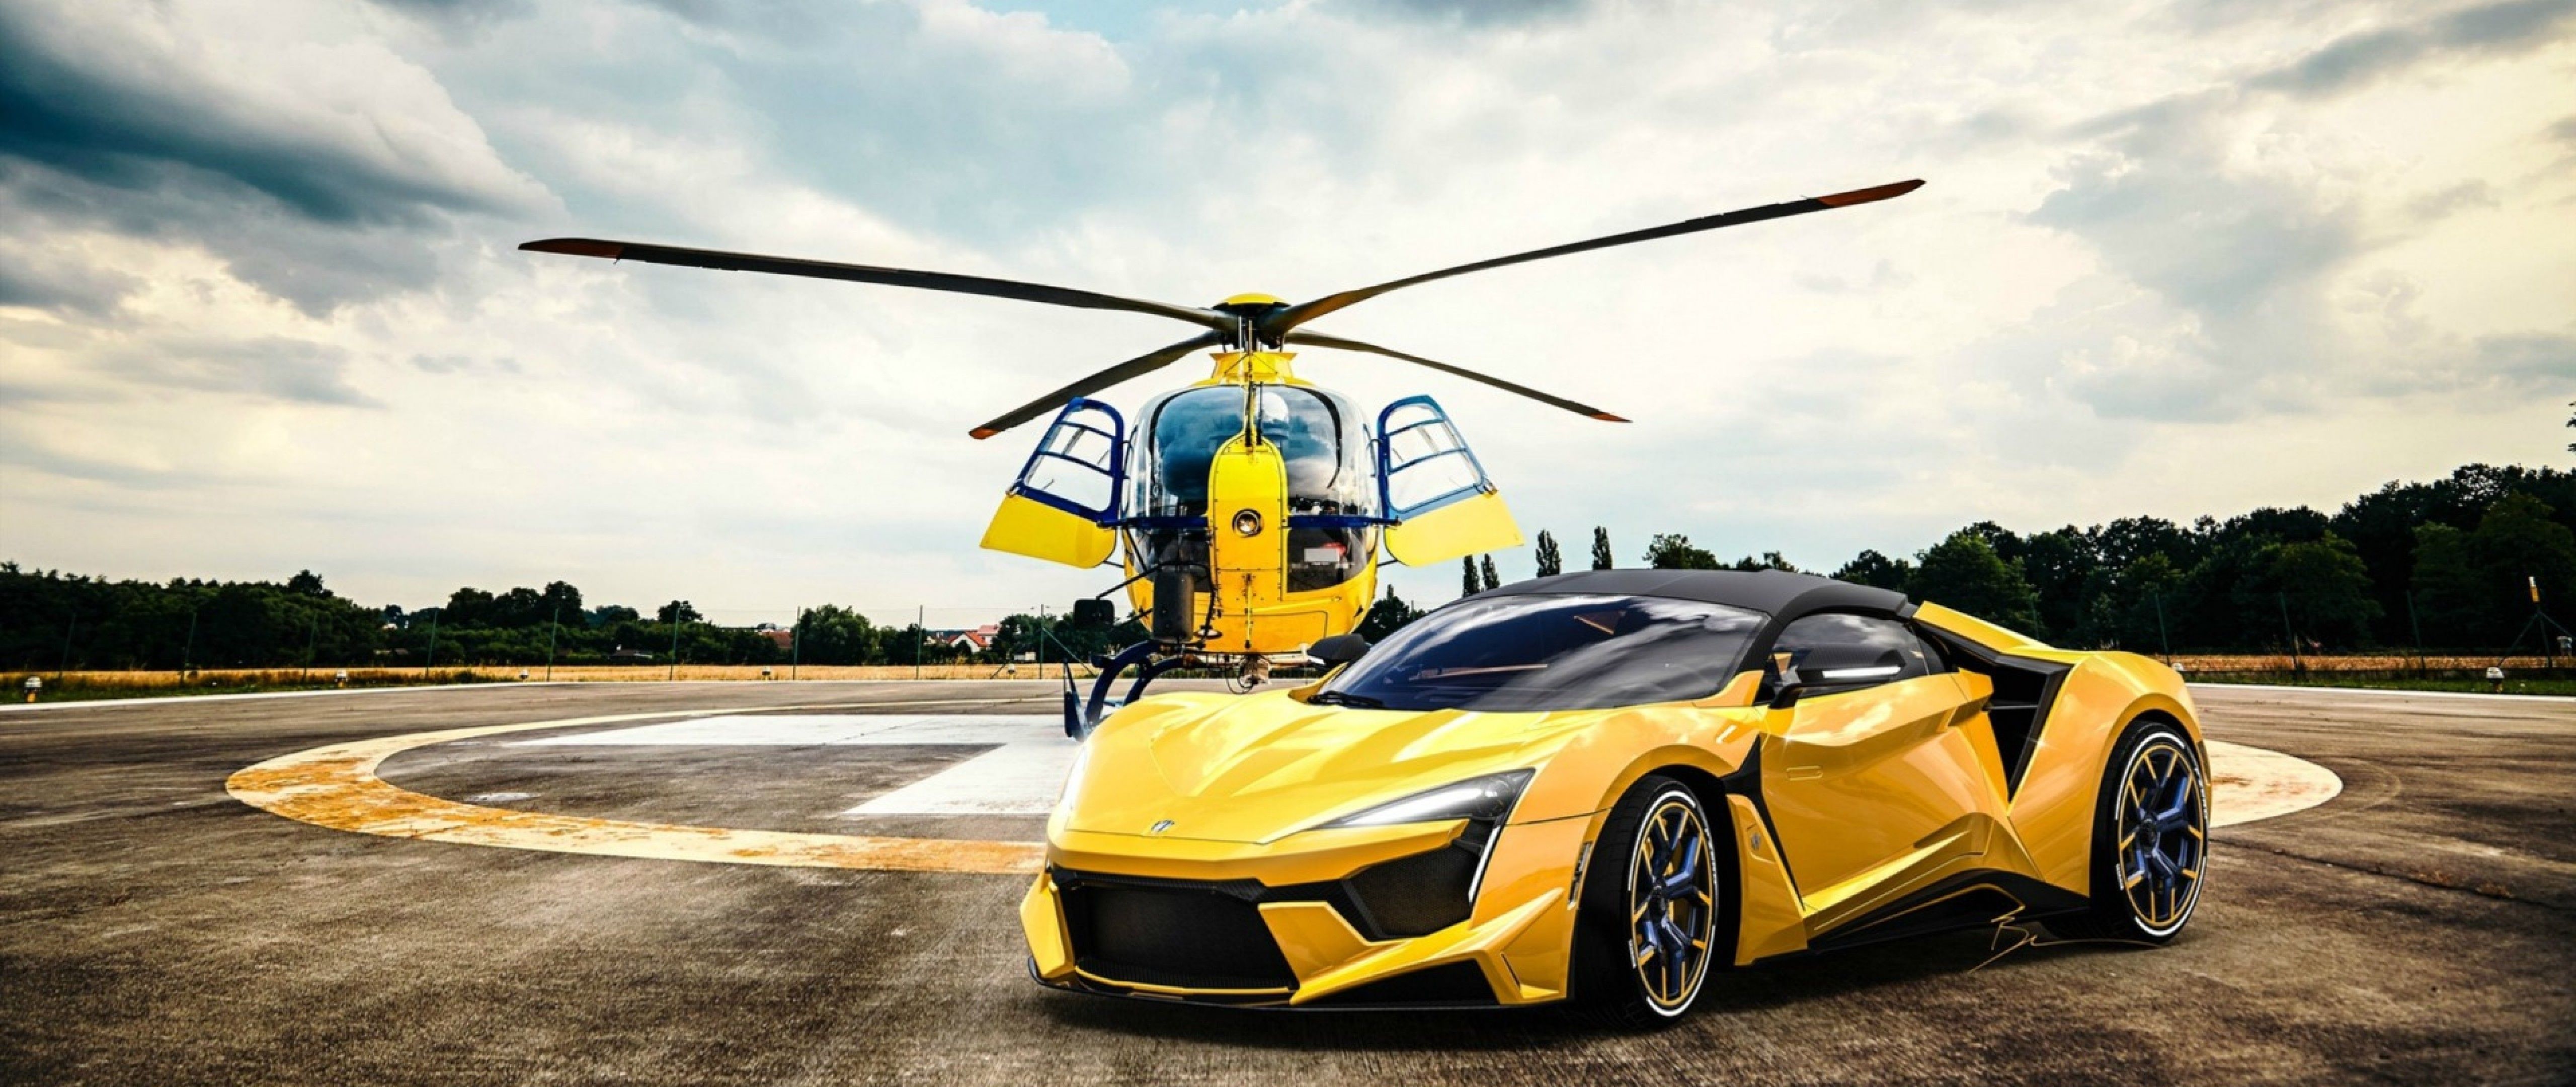 Fenyr Supersport and Helicopter HD Wallpaper 4K Ultra HD Wide TV